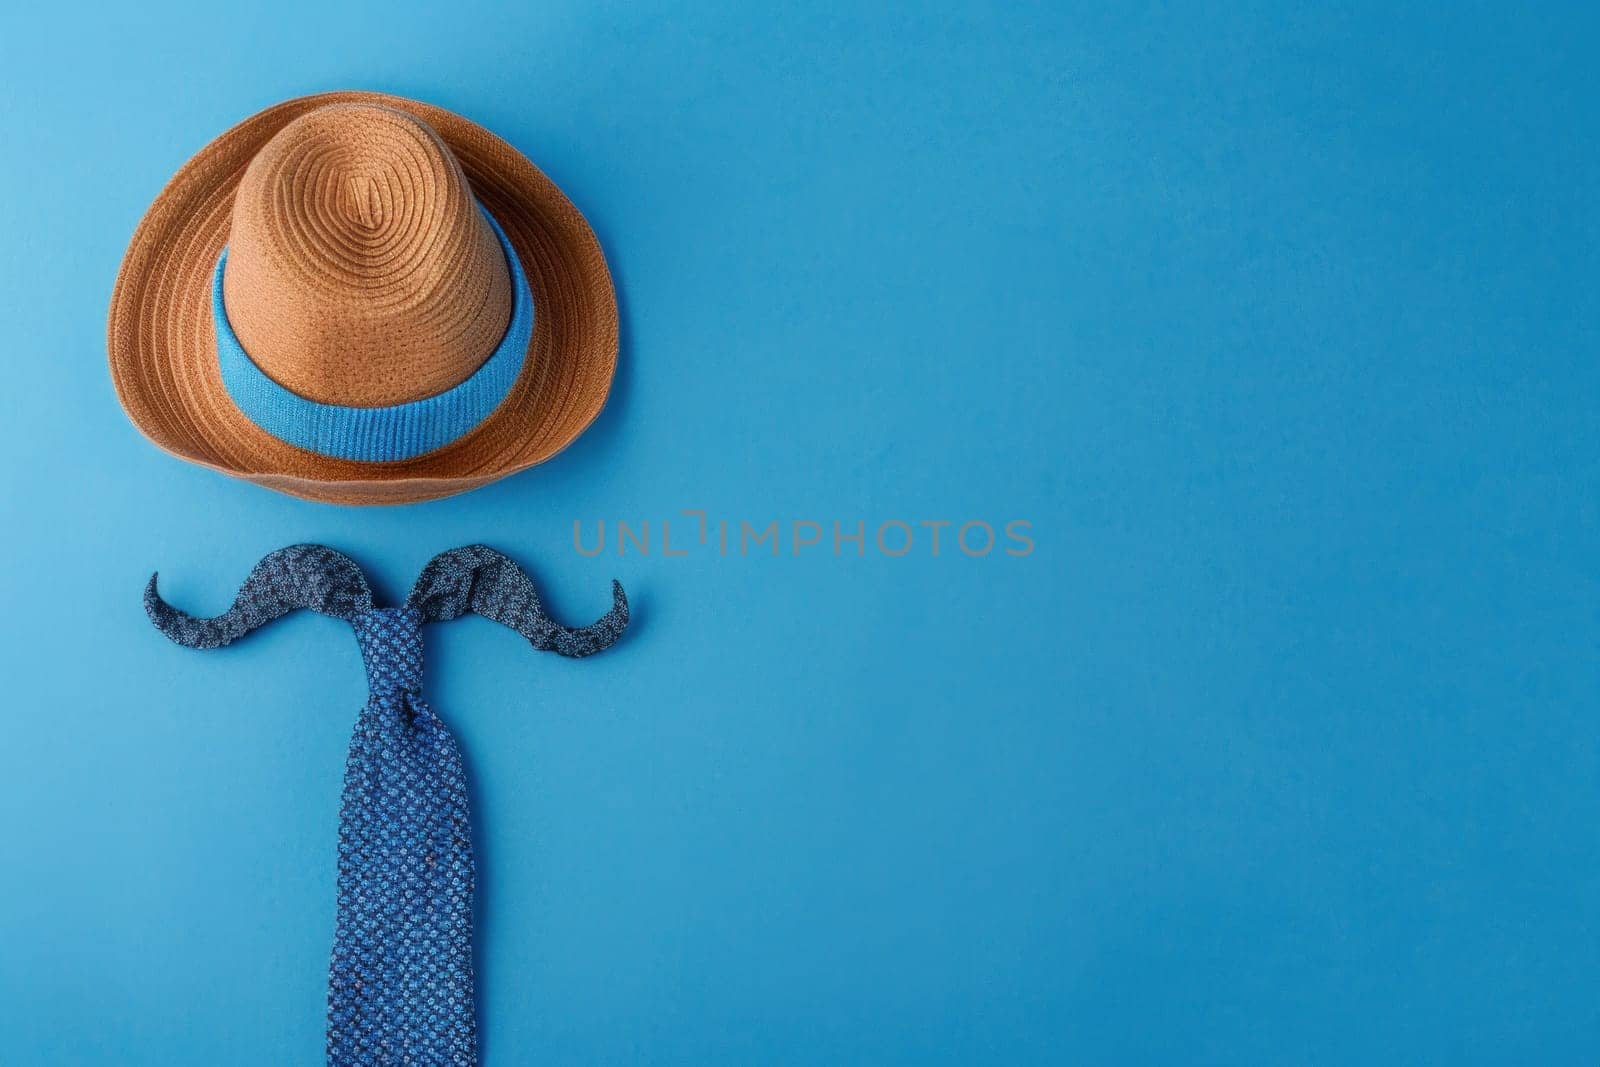 Fashionable gentlemen's accessories on a stylish blue background with copy space for text by Vichizh